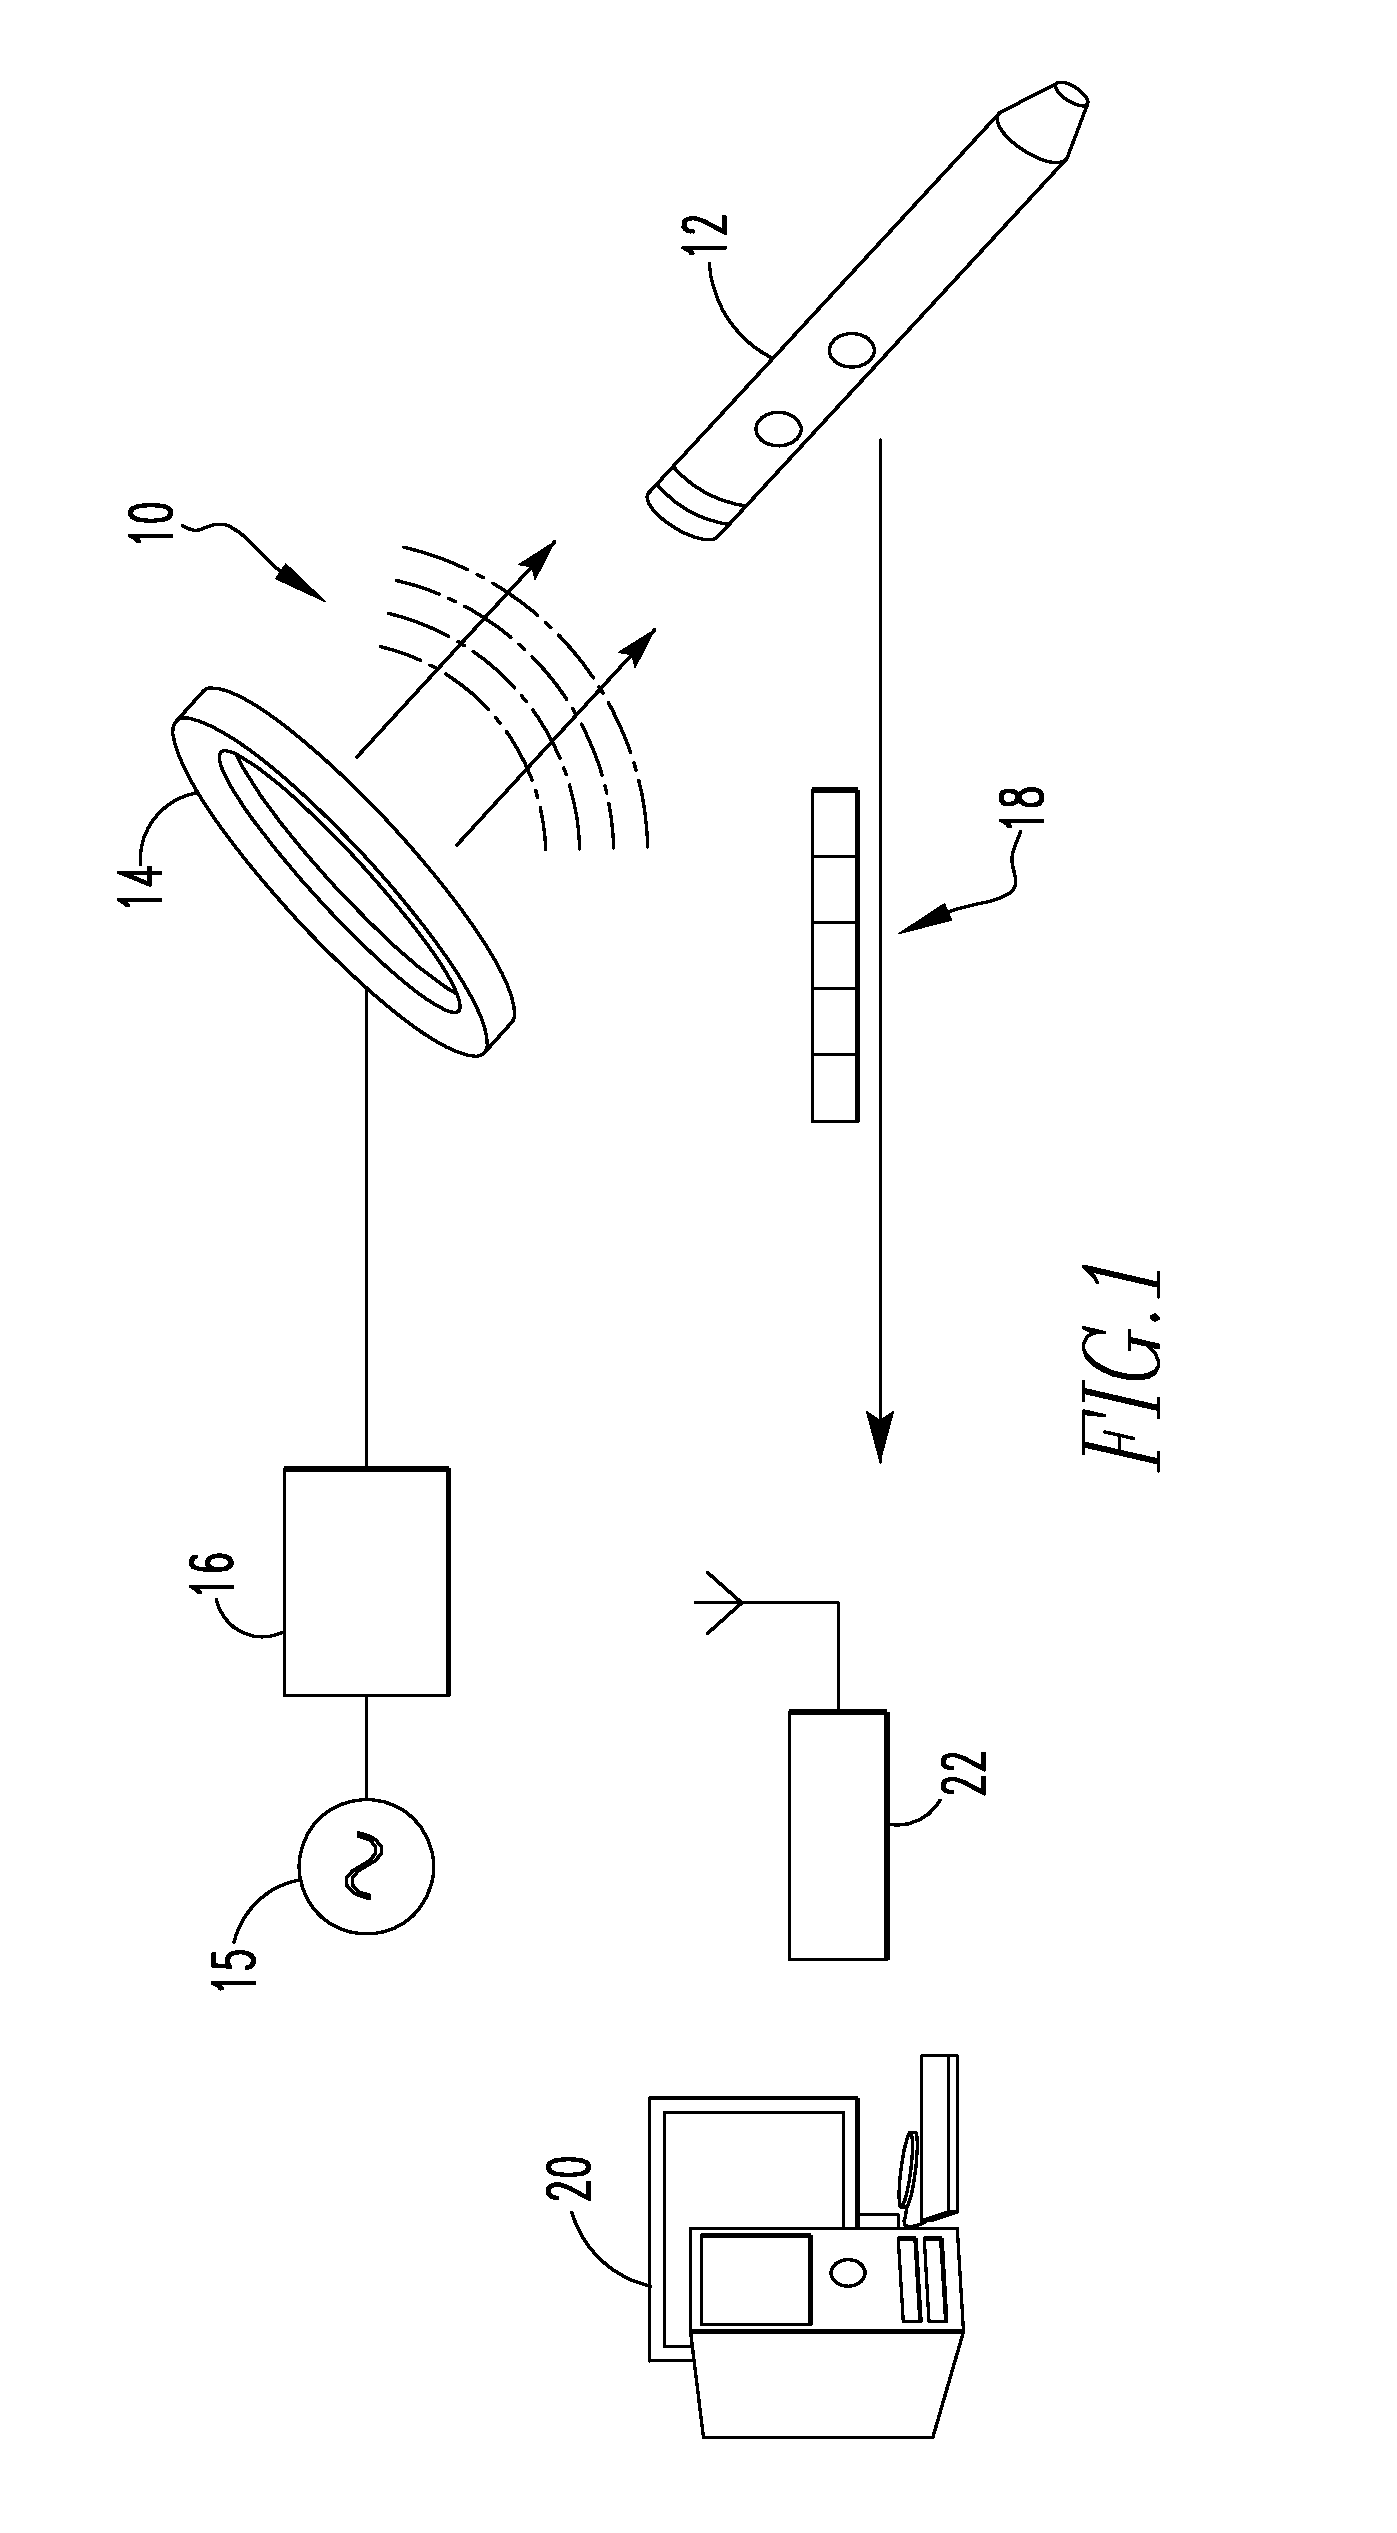 System and method for communicating with an implant